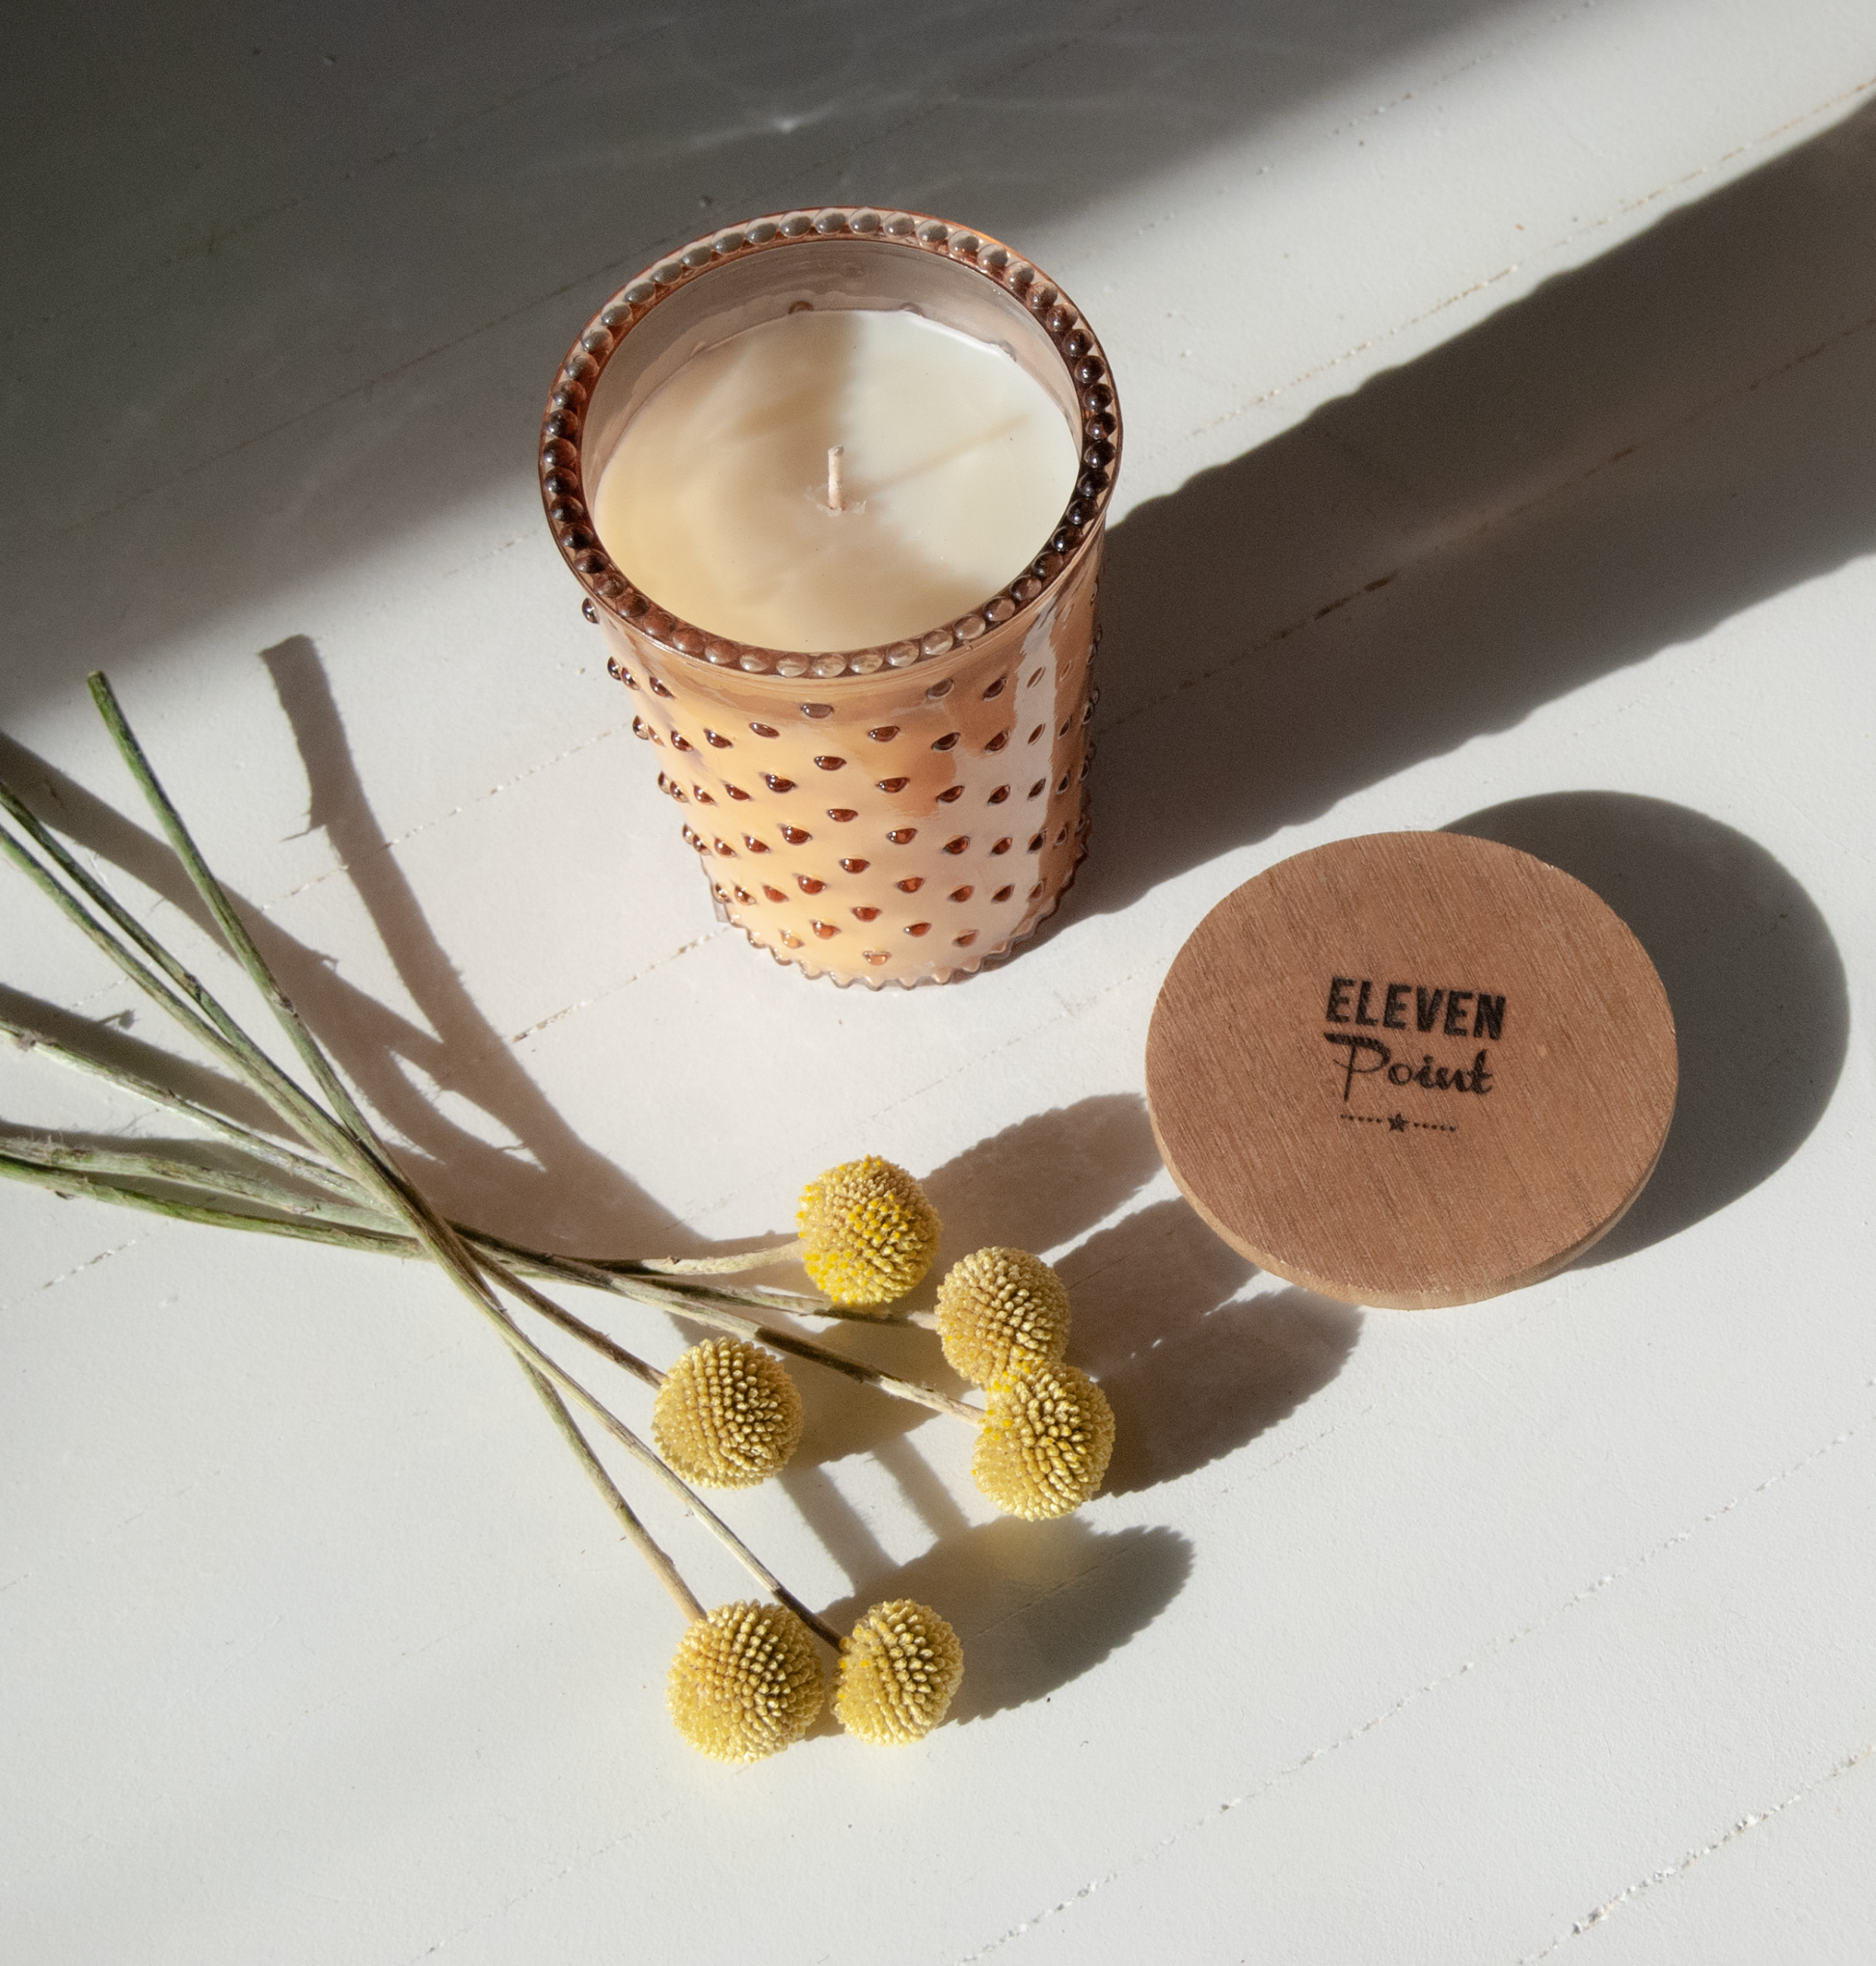 Campfire Coffee Hobnail Candle in Caramel Candle Eleven Point   